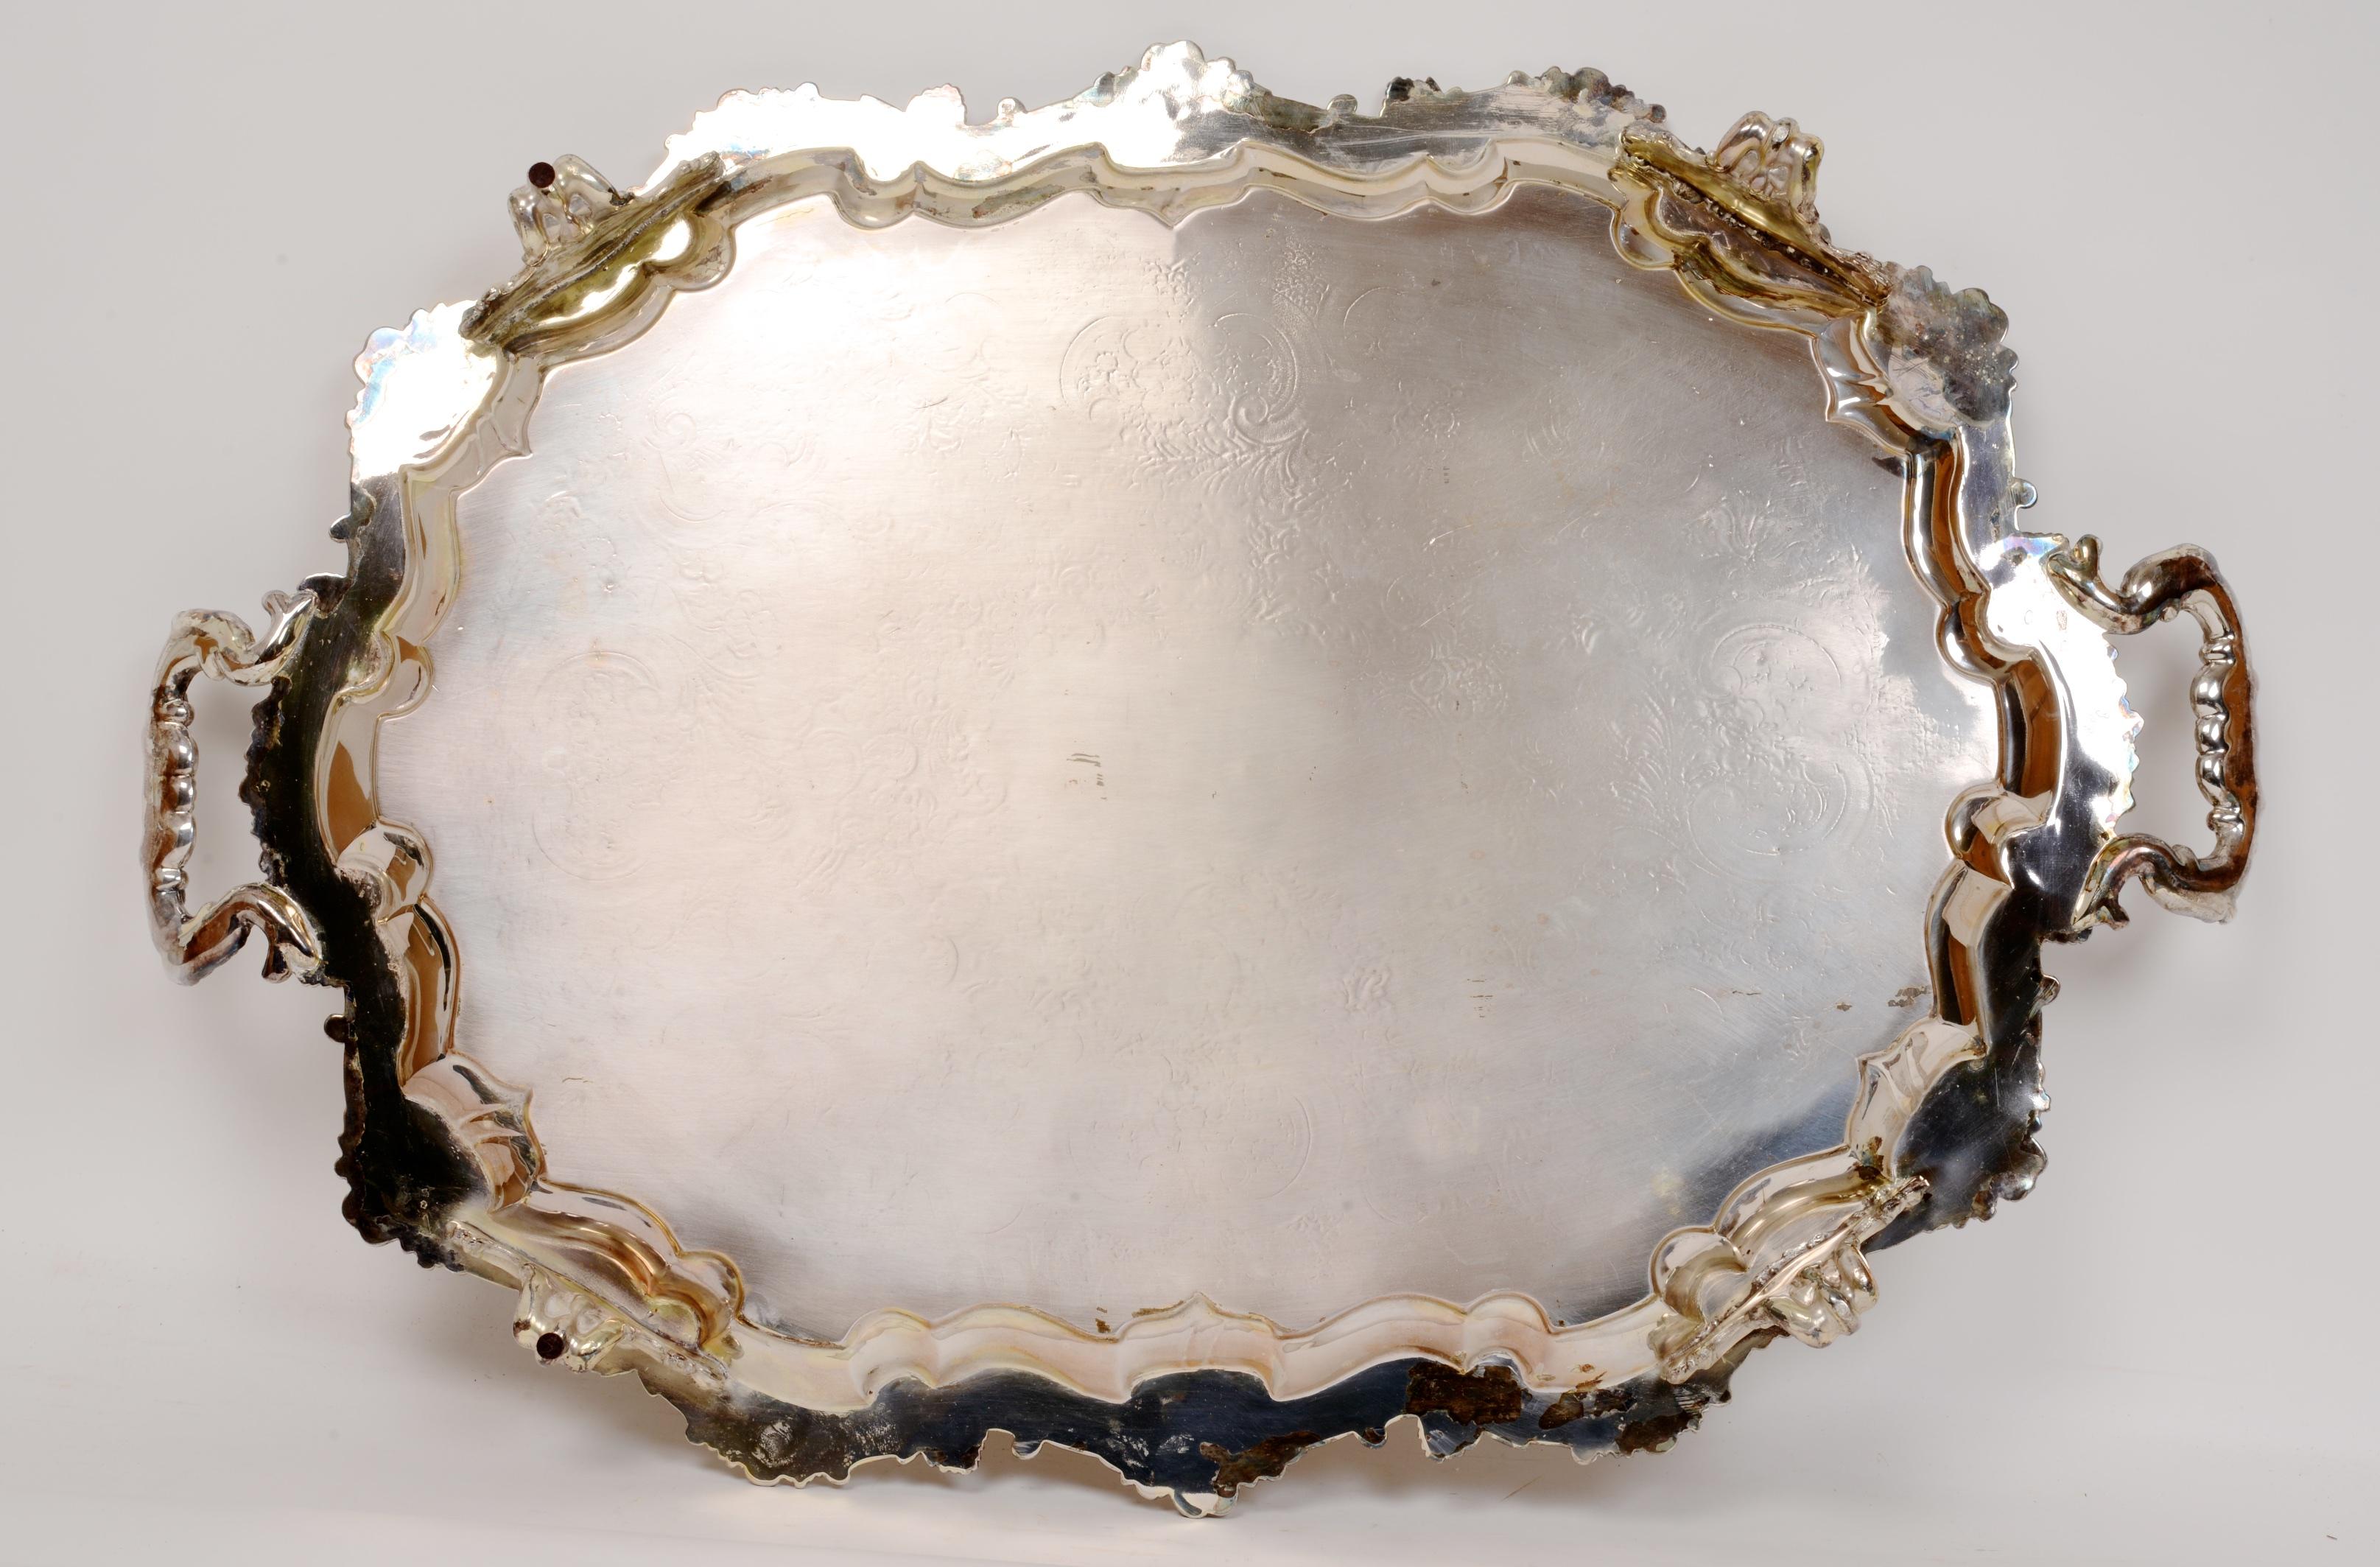 Large Antique Silver Plated Serving Tray with Incised Floral Decoration For Sale 4